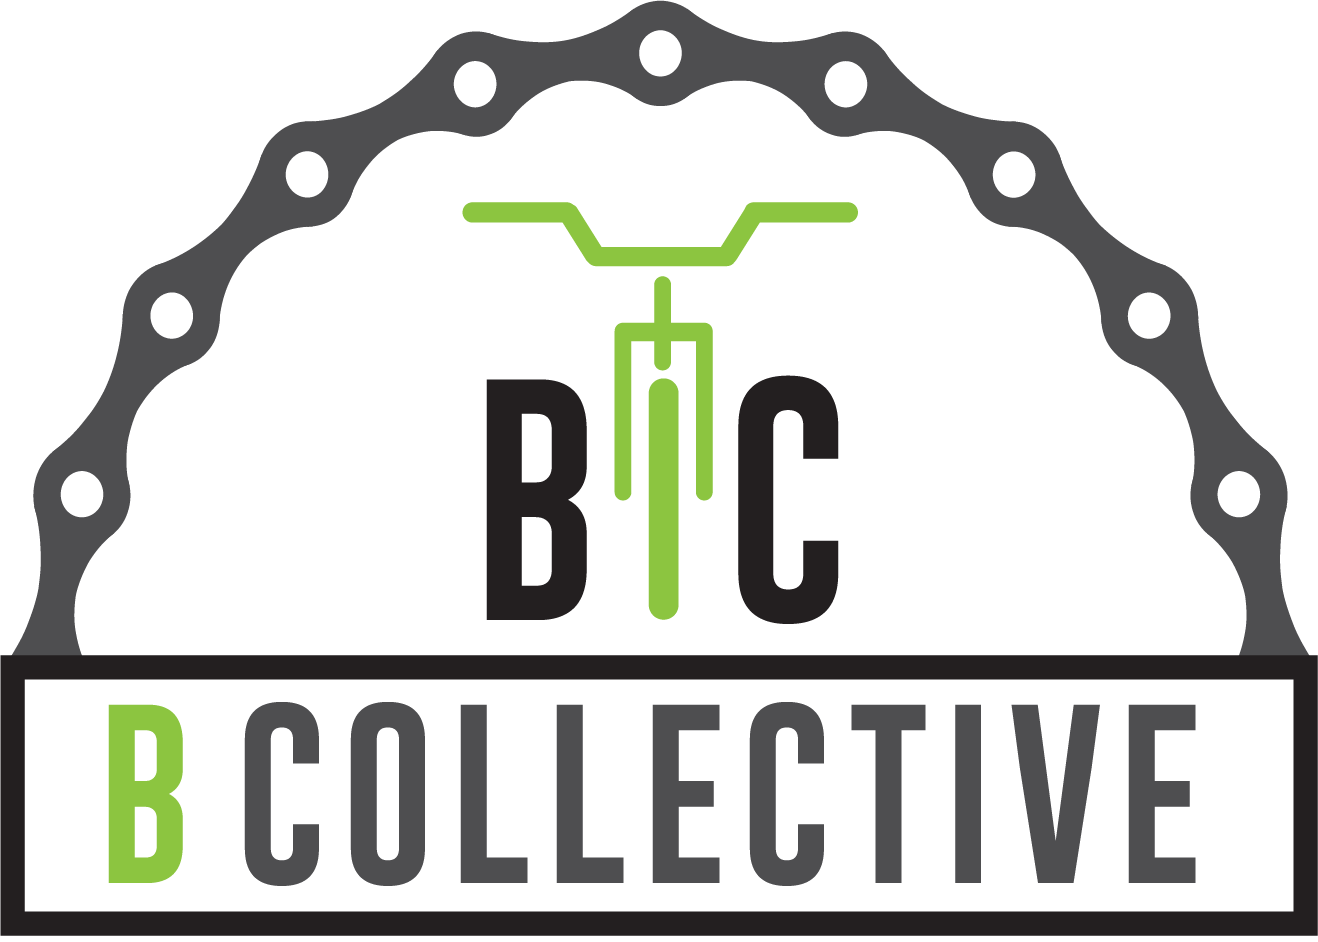 BCollective